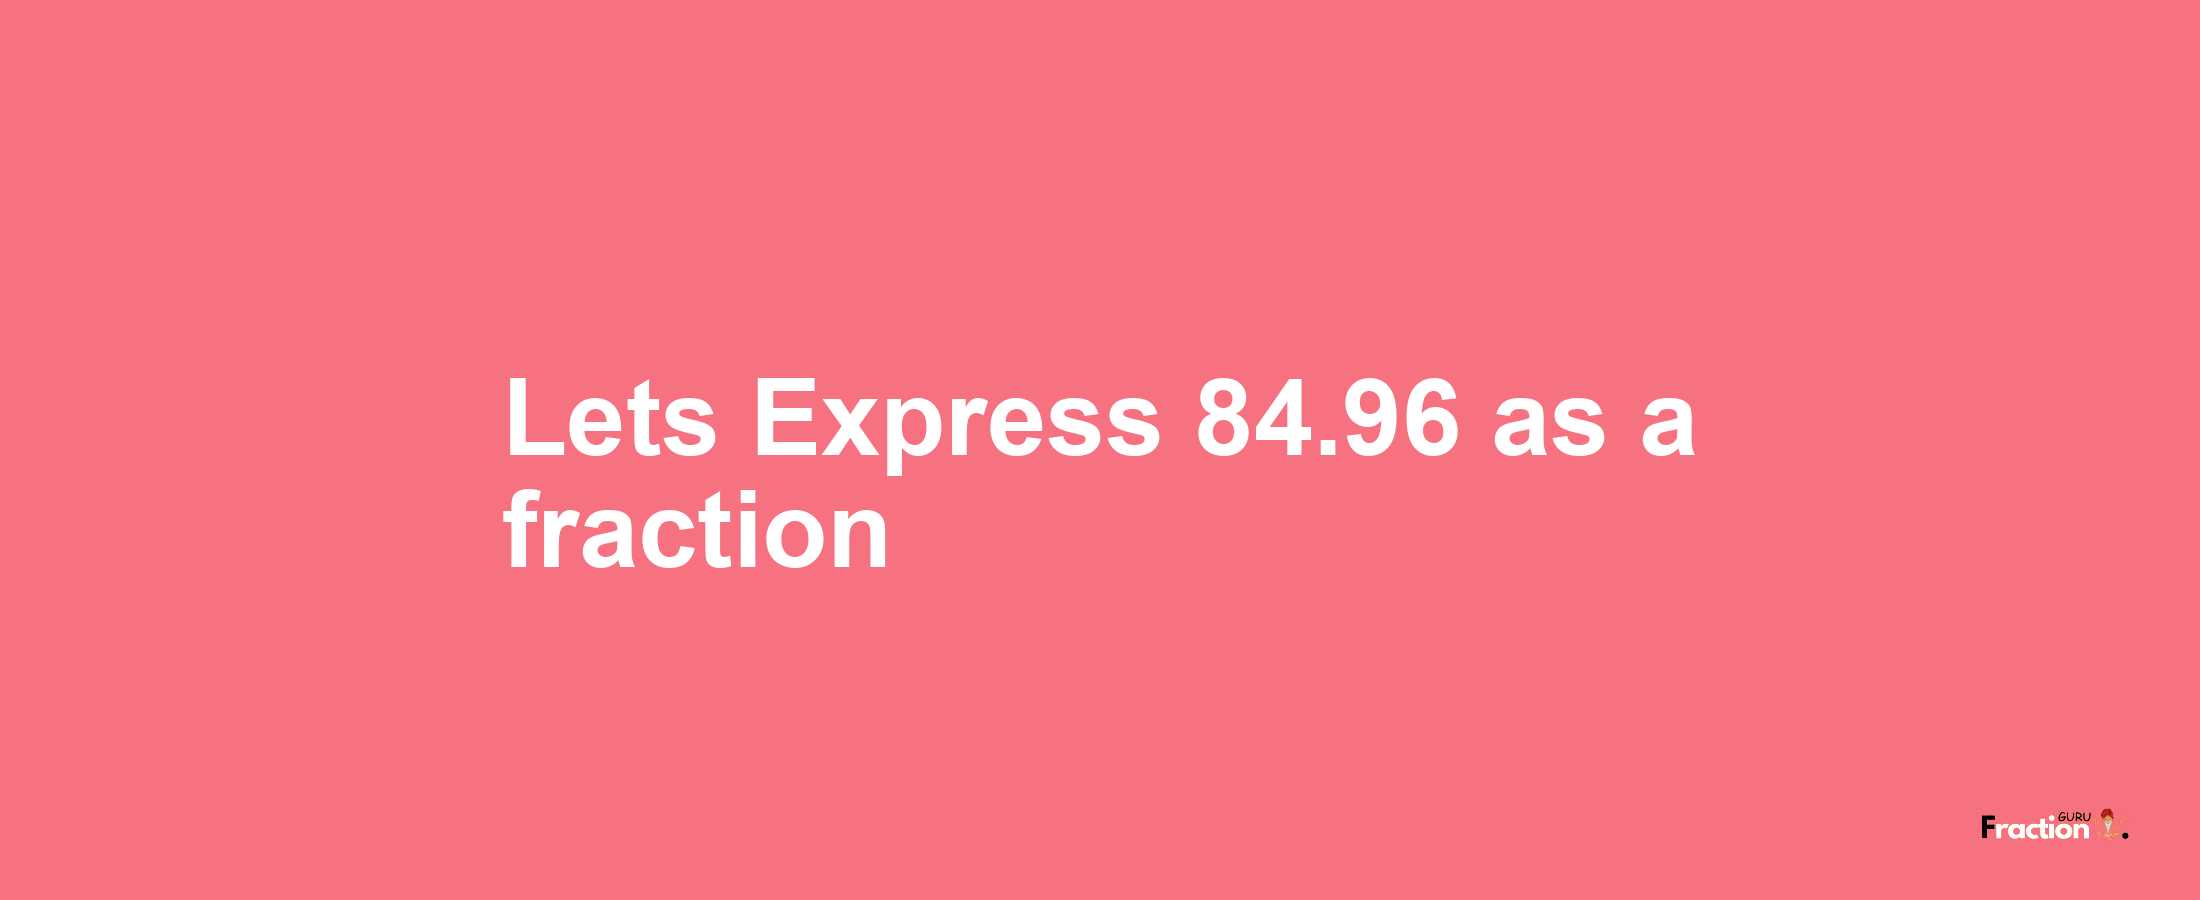 Lets Express 84.96 as afraction